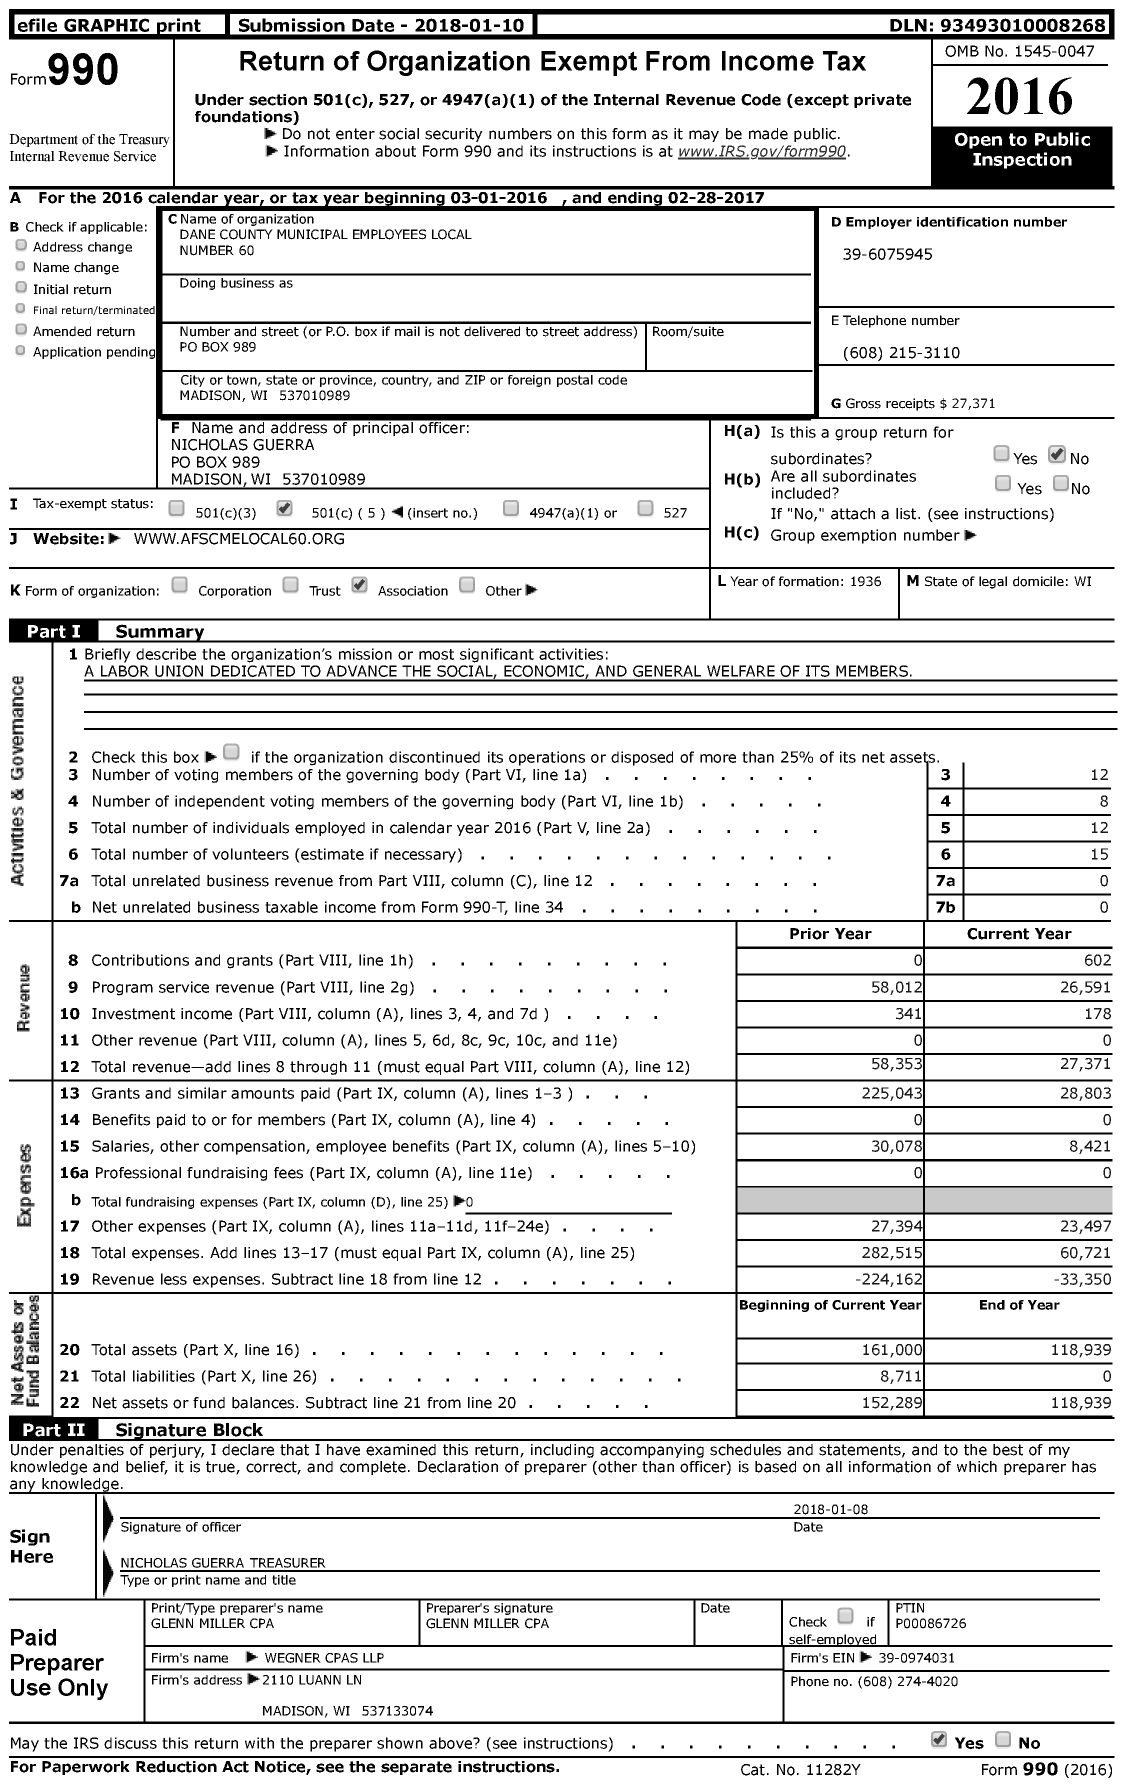 Image of first page of 2016 Form 990 for American Federation of State County & Municipal Employees - L0060wi Dane Co Wis Munic Emp